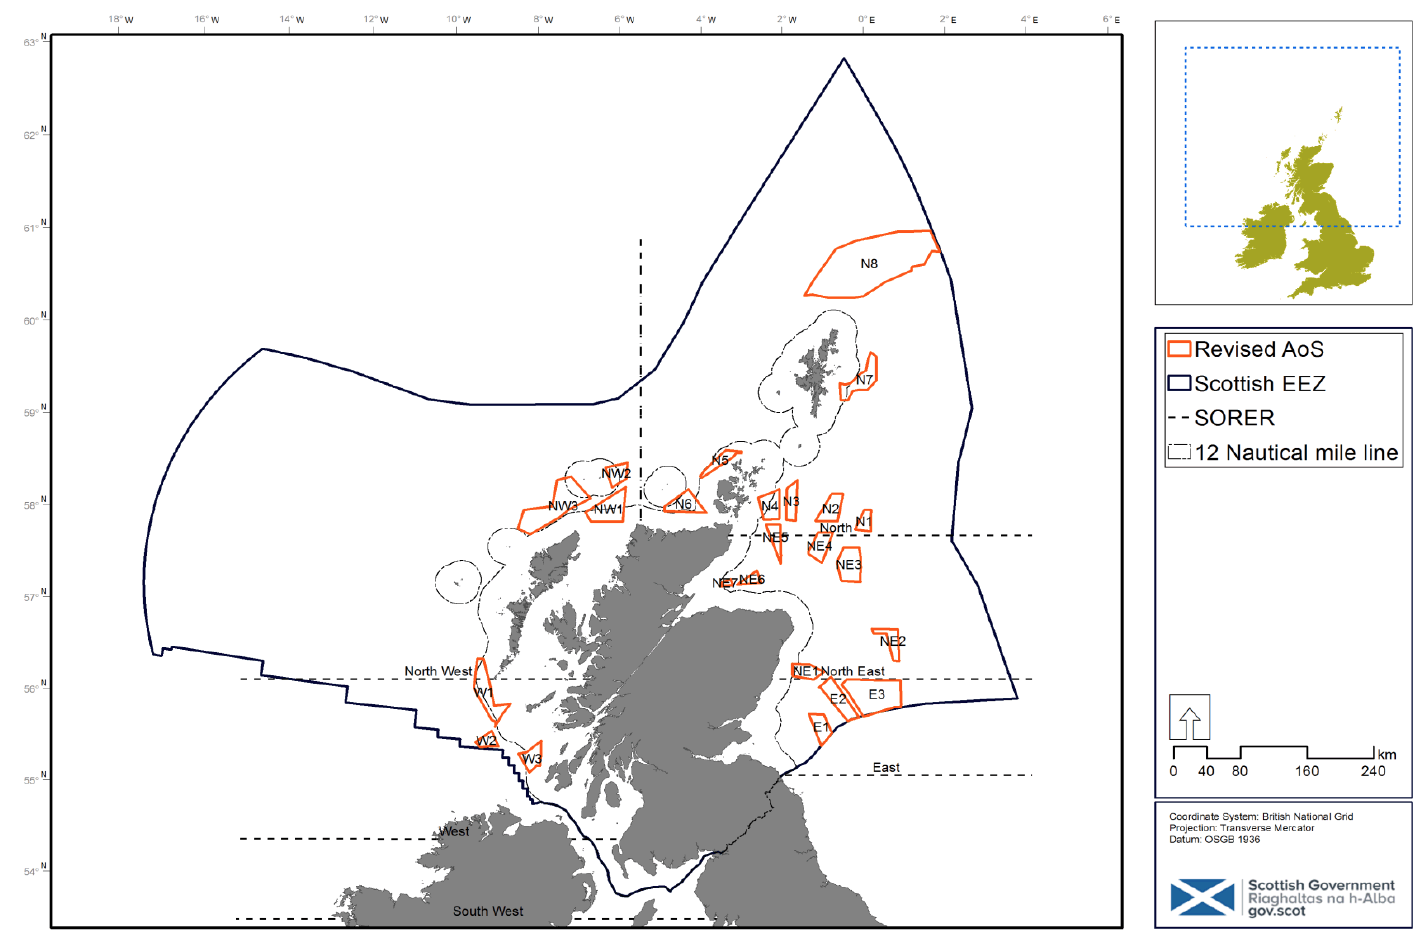 Figure 2. Proposed Areas of Search